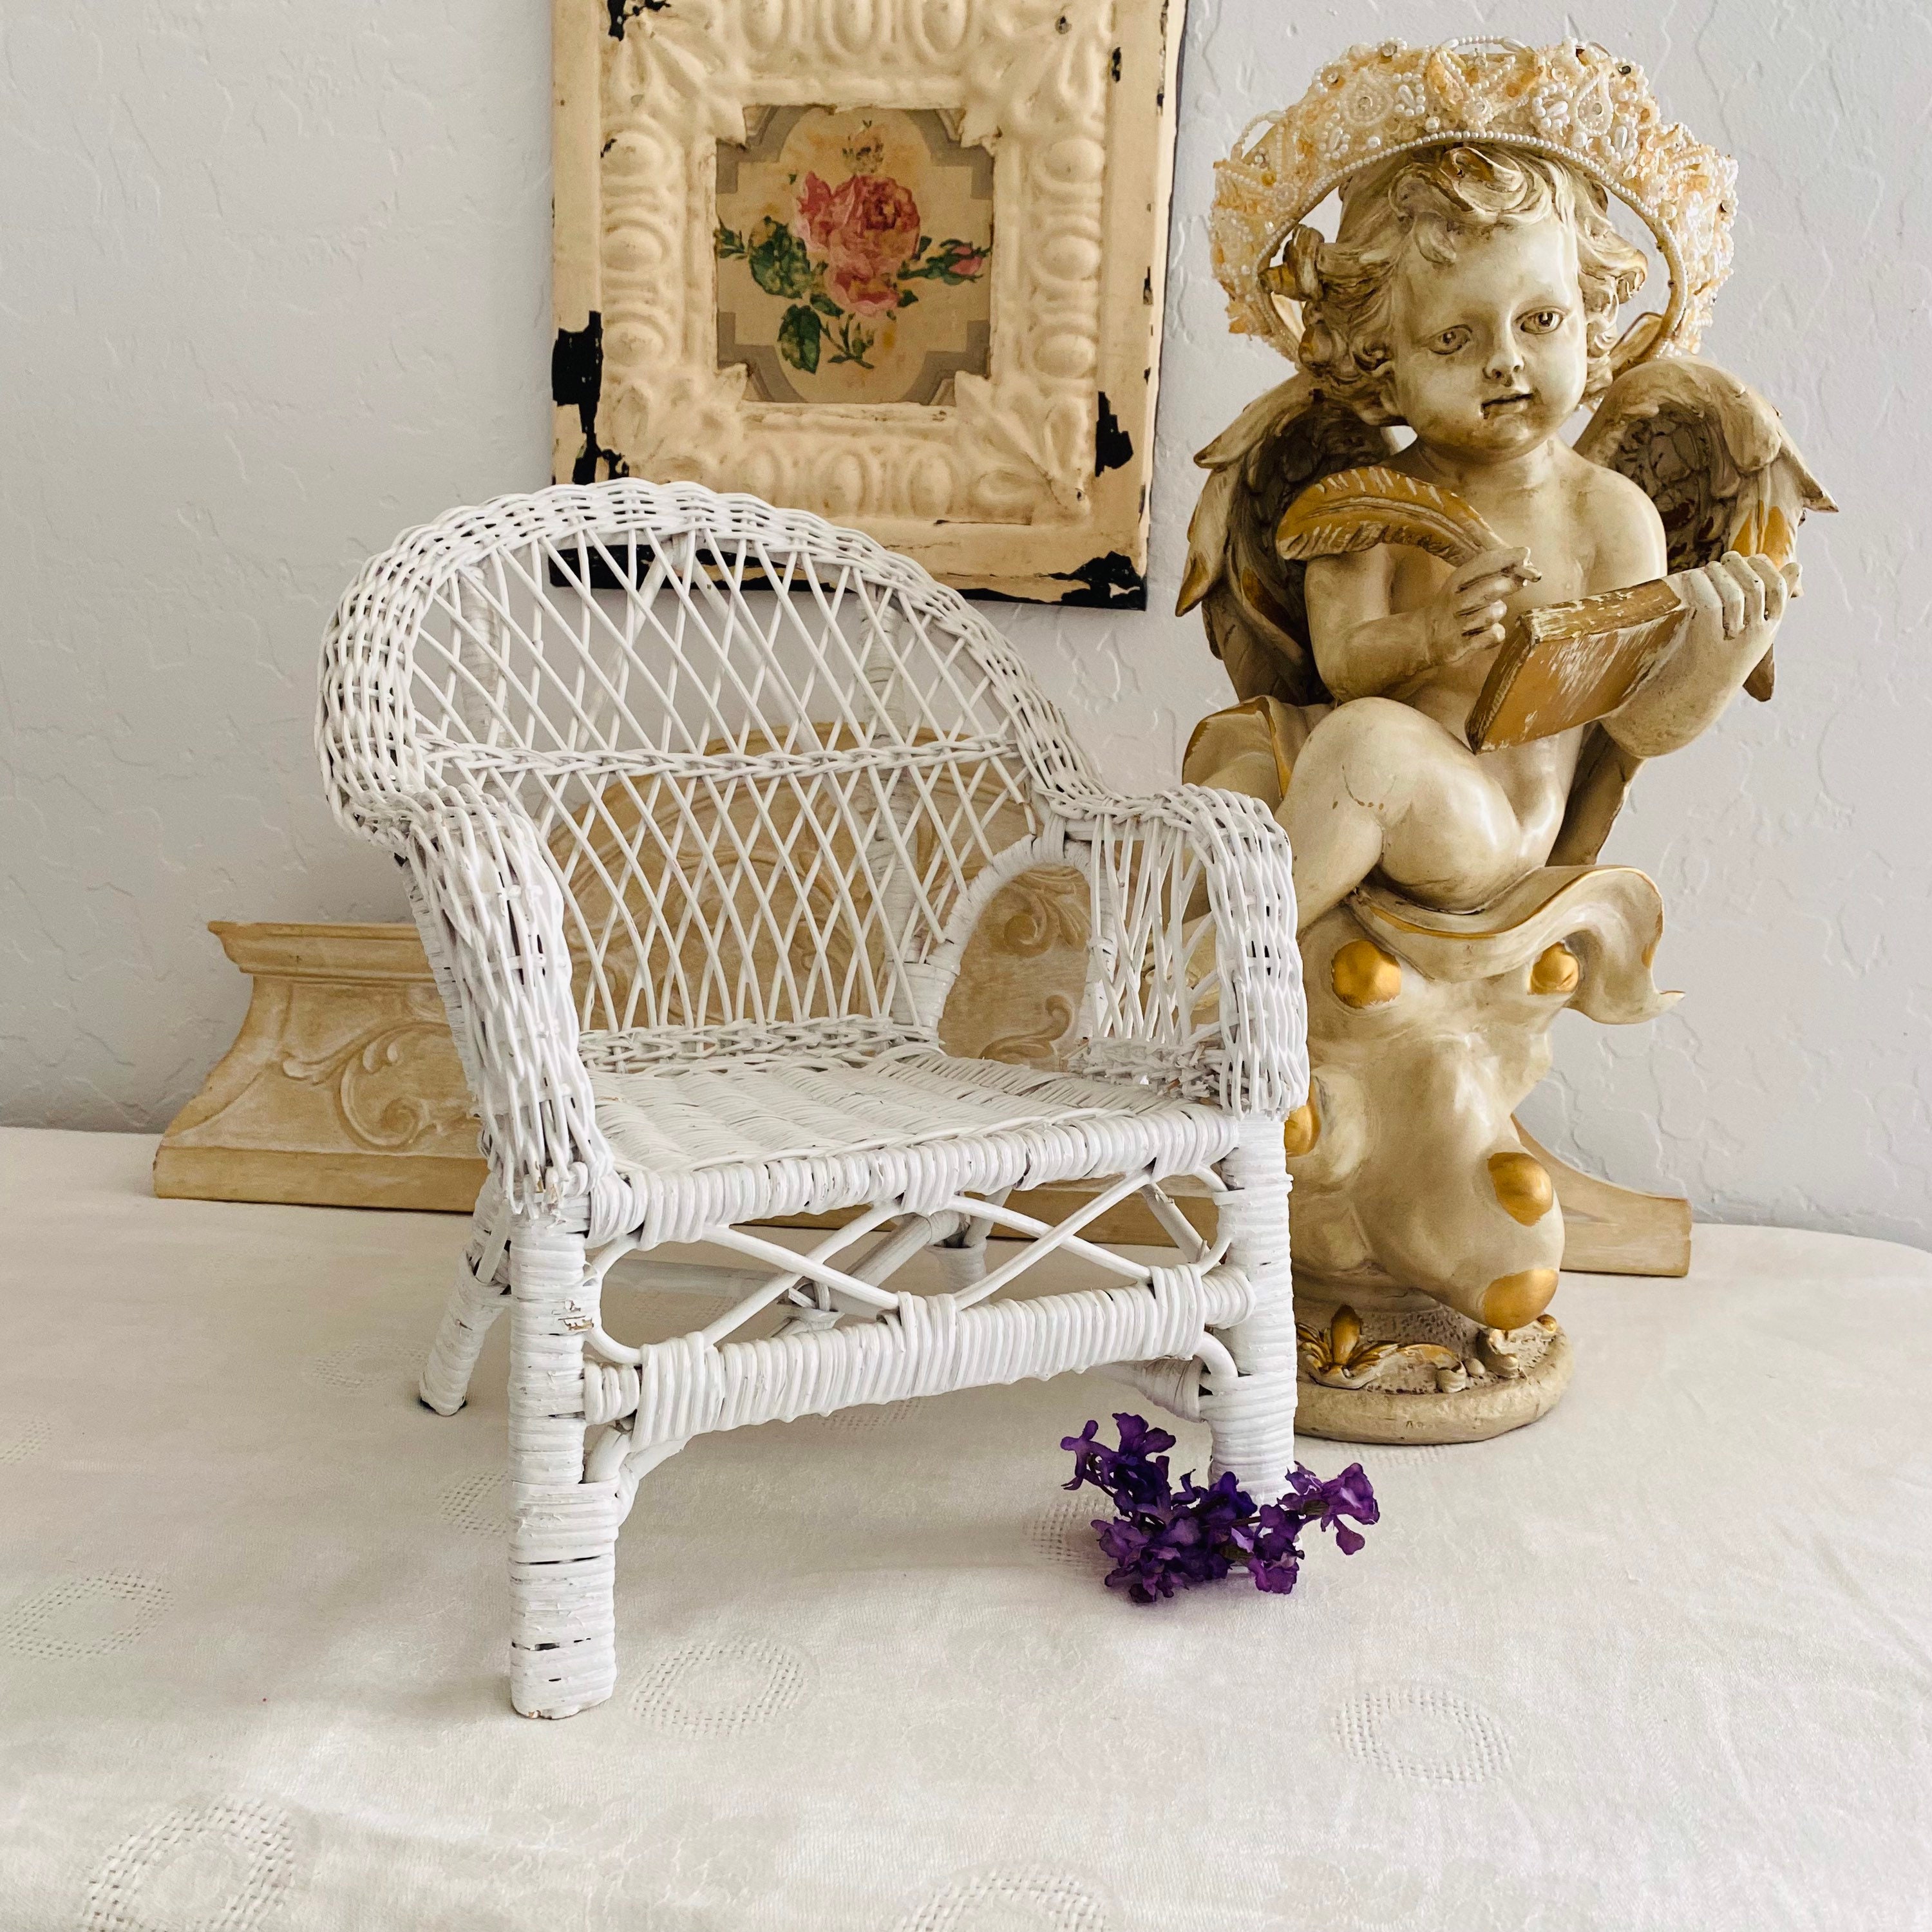 Vintage White Wicker Heart Shaped Doll Chair, 9.5 Tall